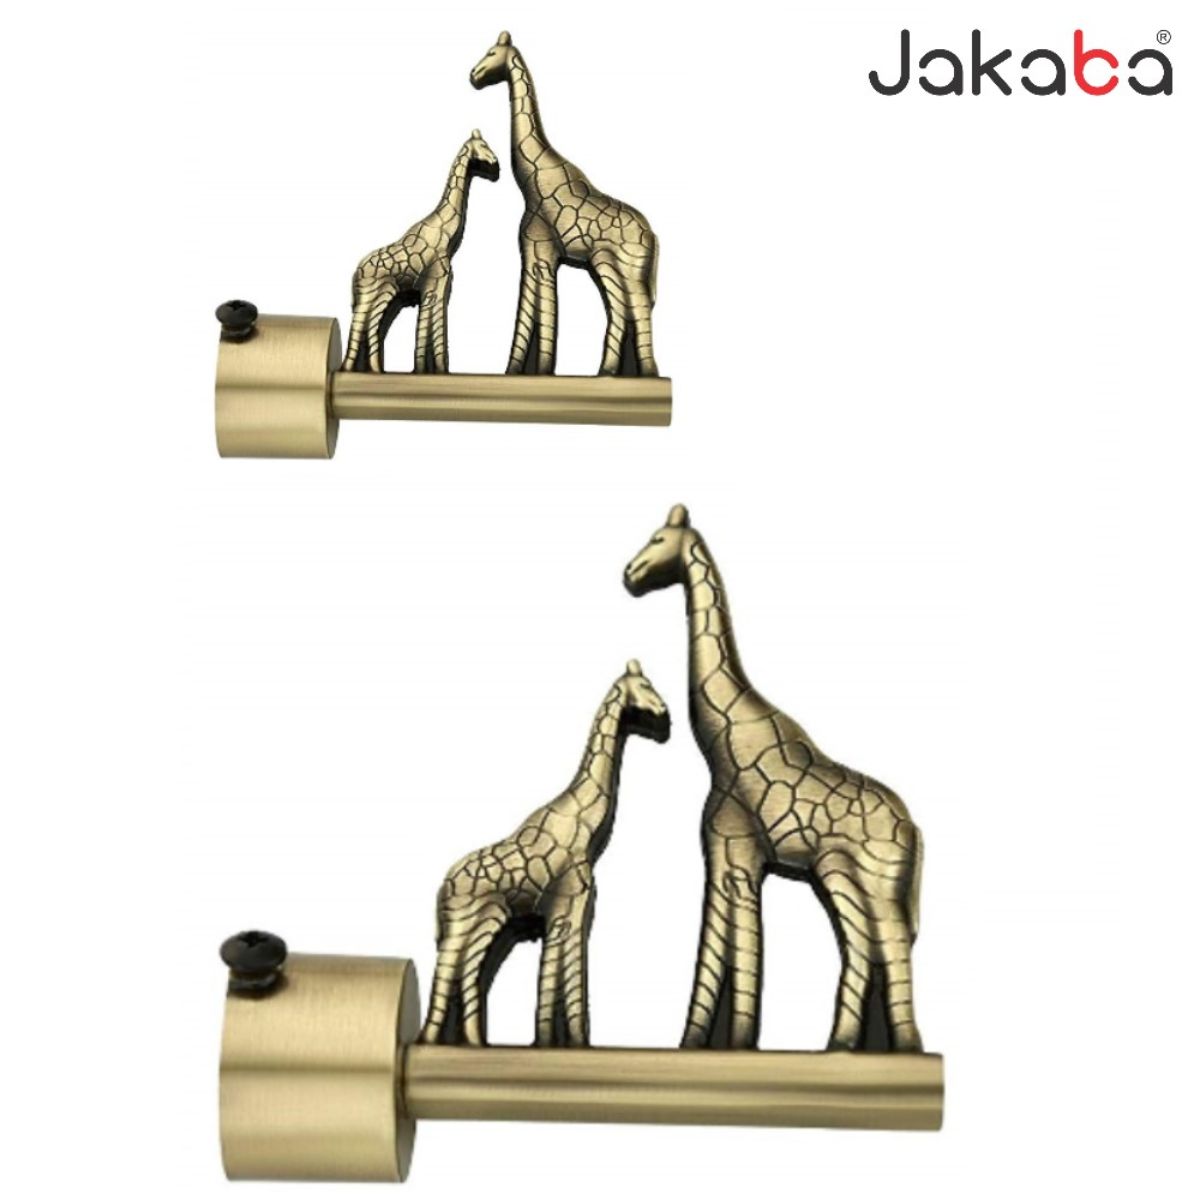 JAKABA Antique Brass Curtain Finials (Without Supports) - Pack Of 2 Pcs (1  Pair) : Curtain Brackets Set/Holders - JKBATQ947-01-WOS : Jakaba : Online  Hardware and Interior Store